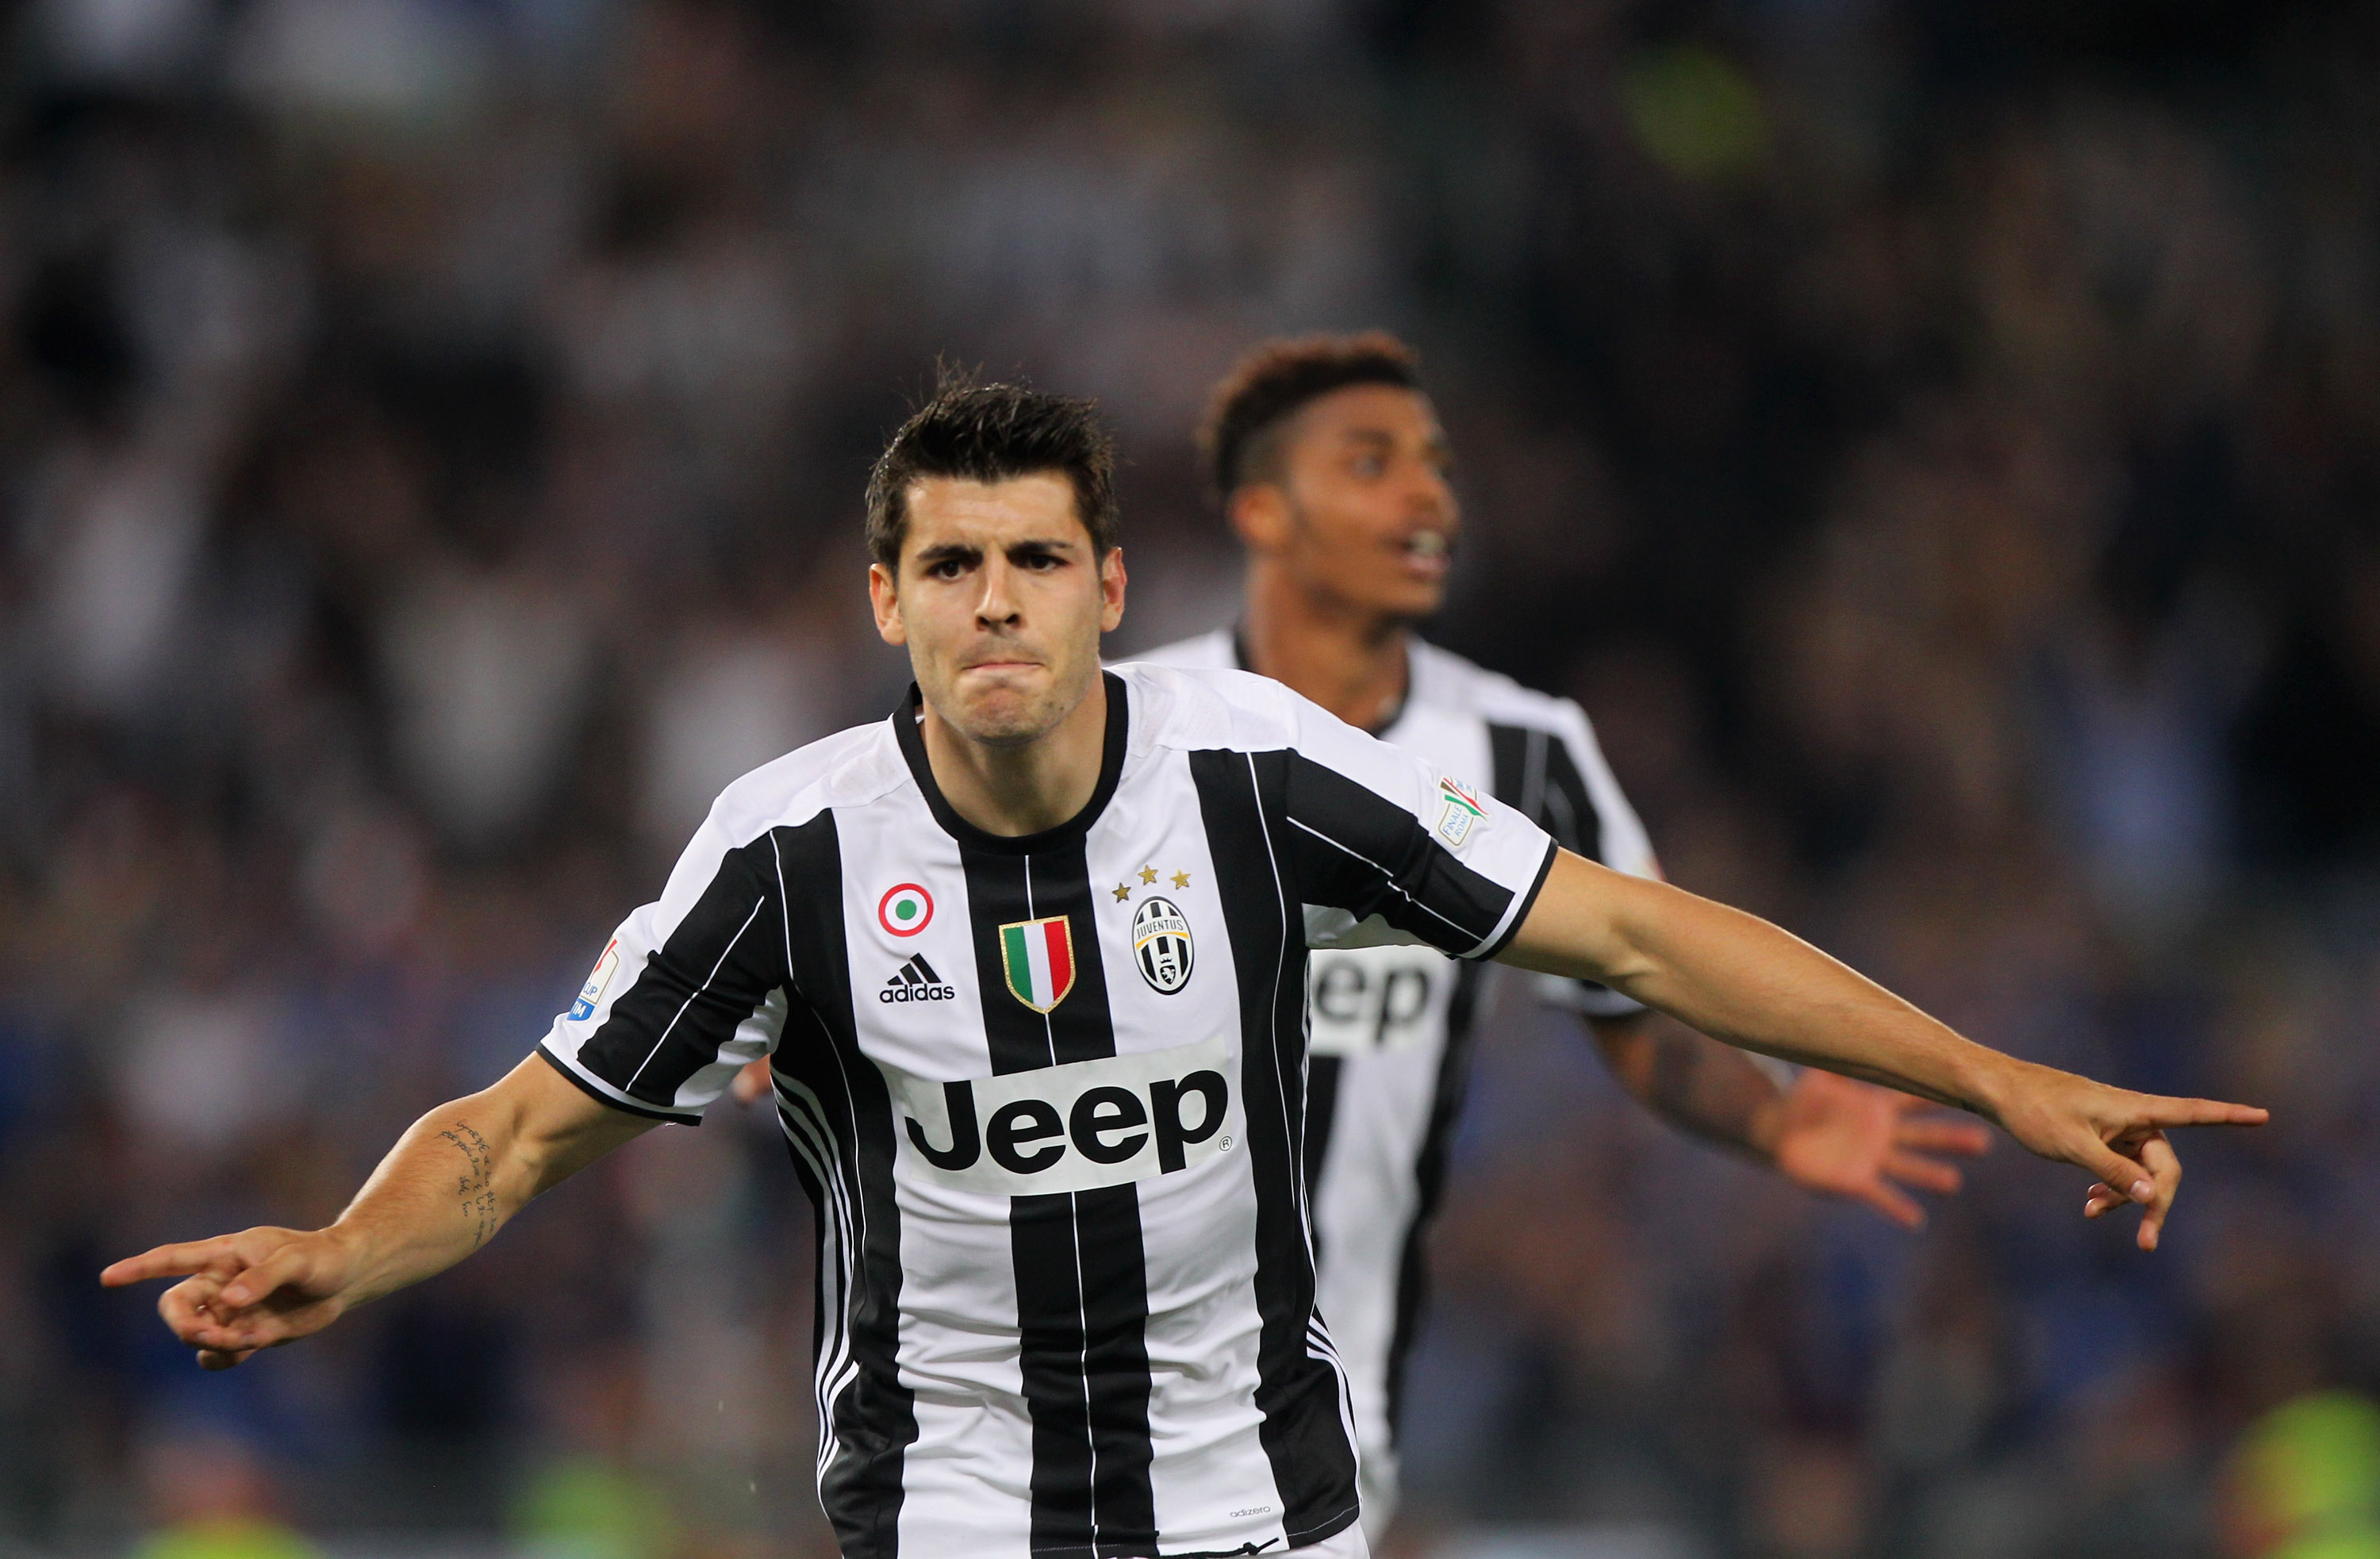 juventus sign atletico forward morata on one year loan deal